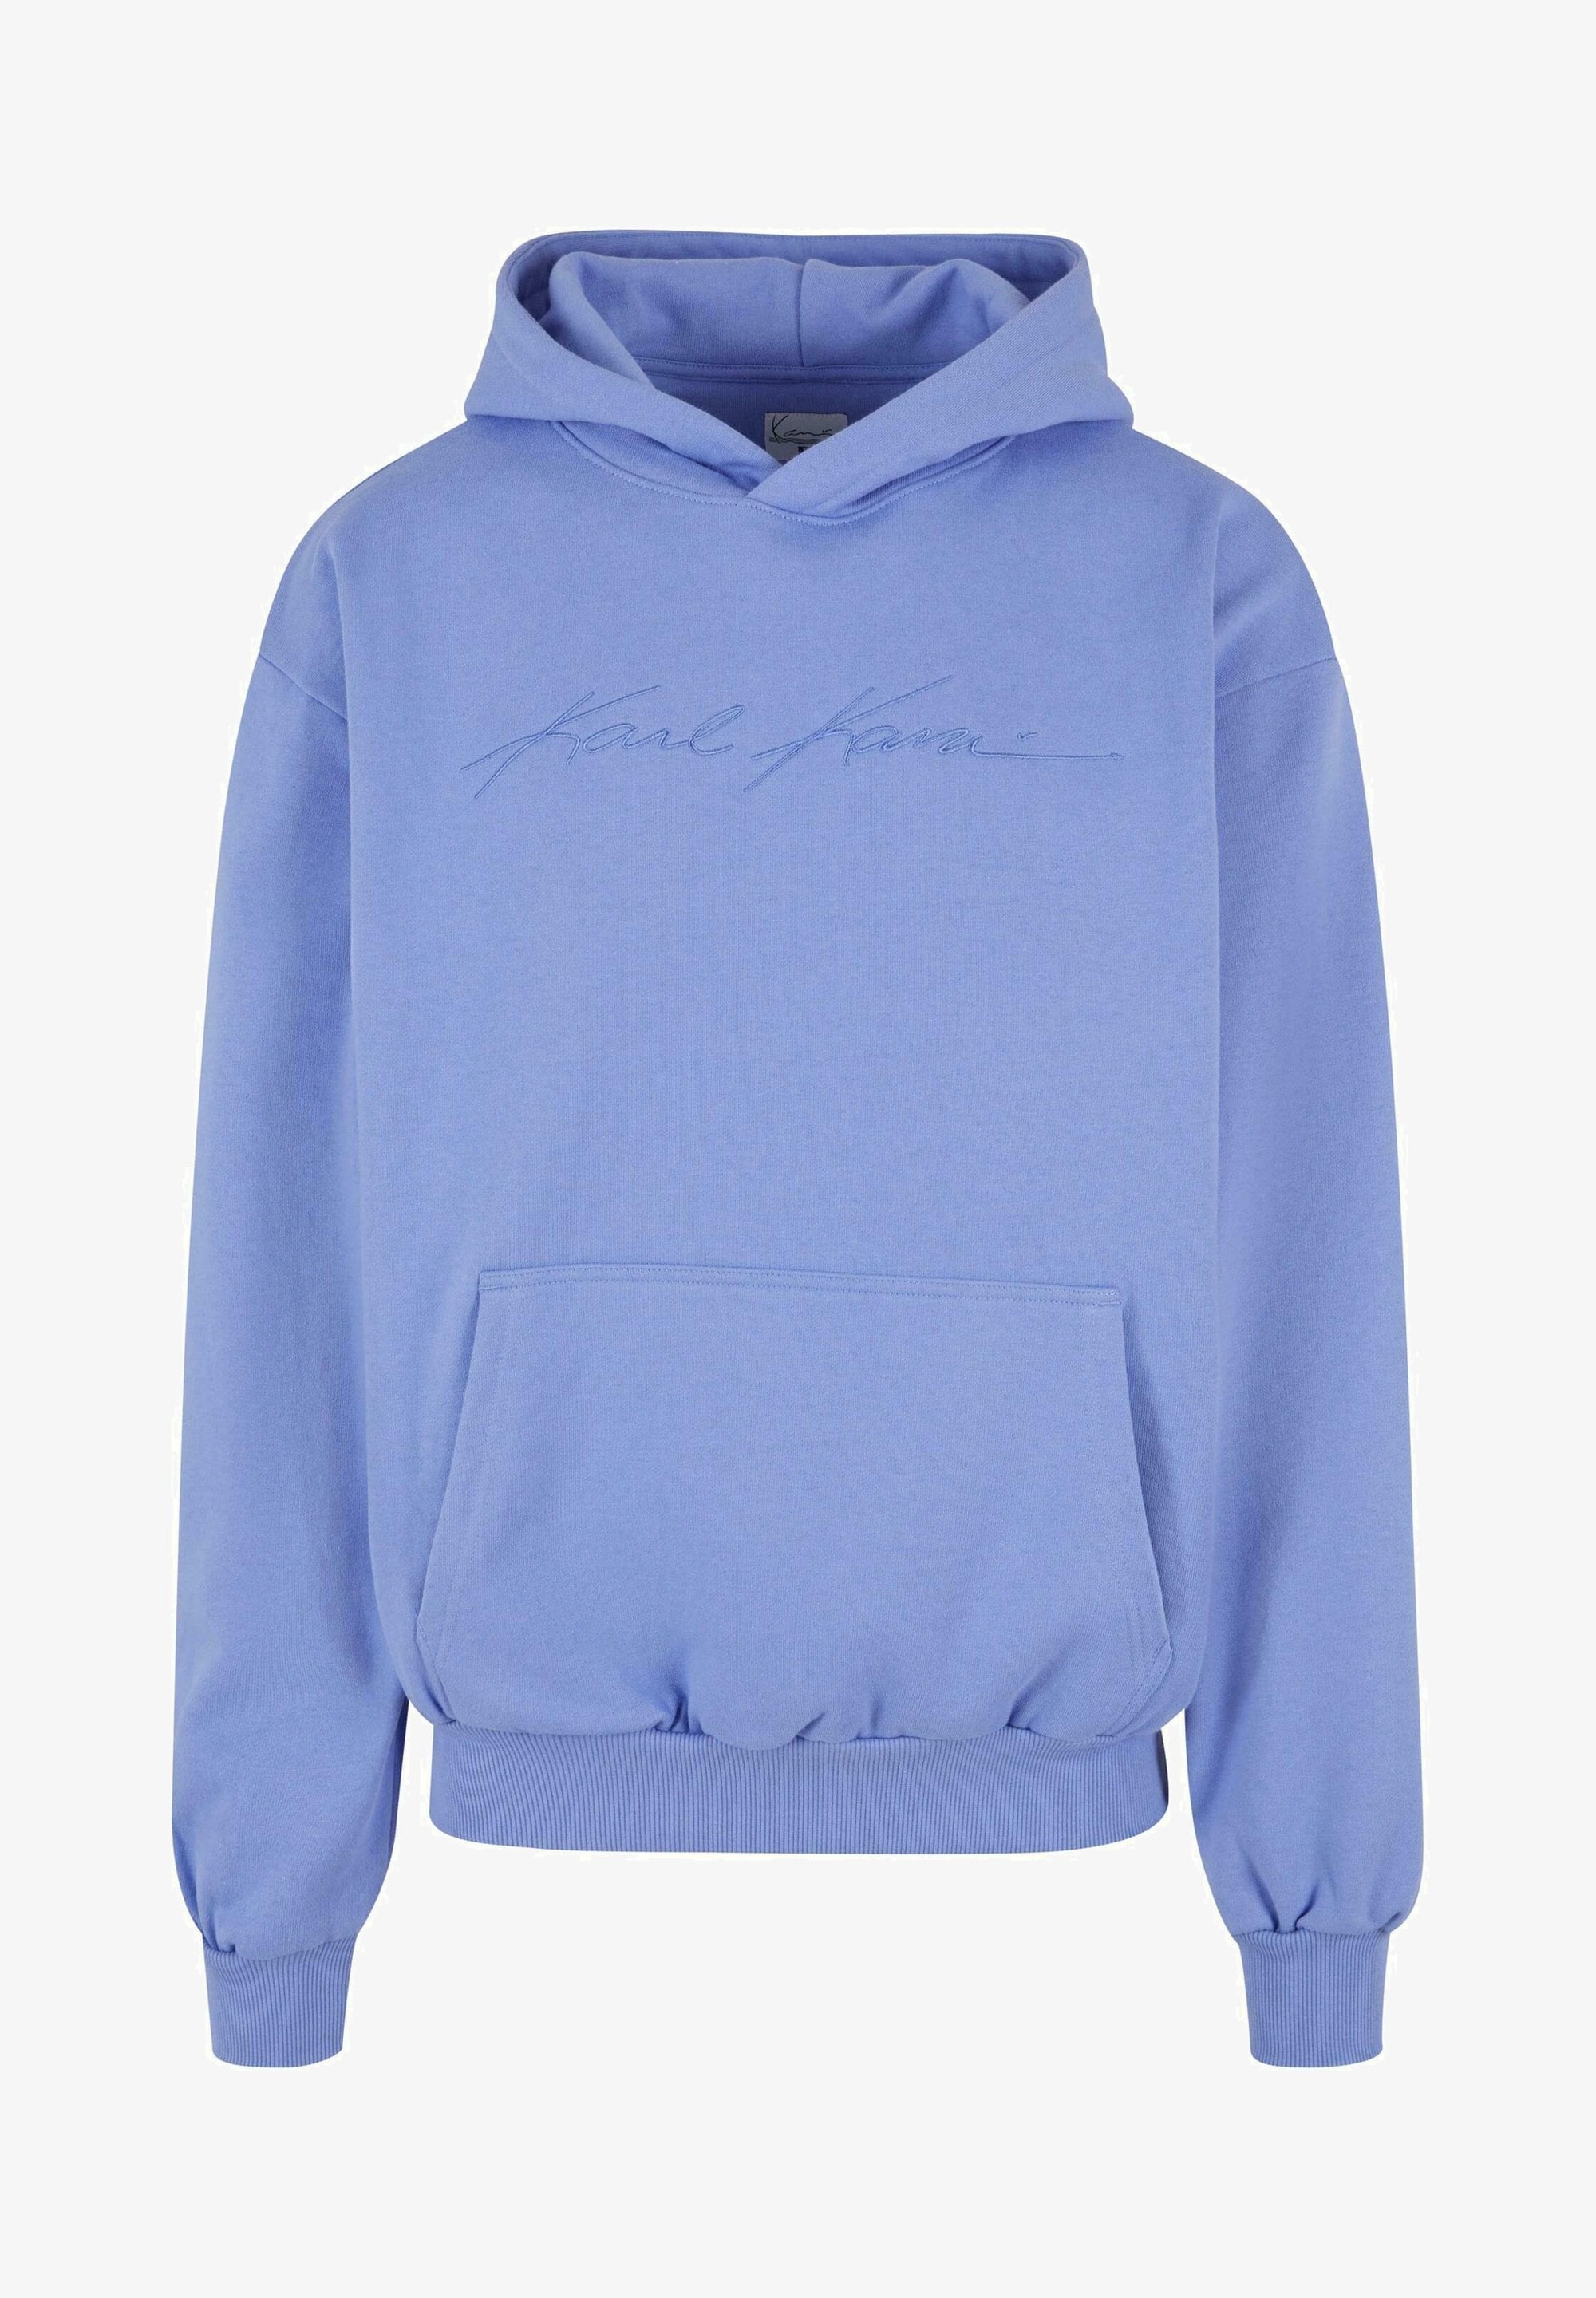 Autograph Hoodie - Highlife Store